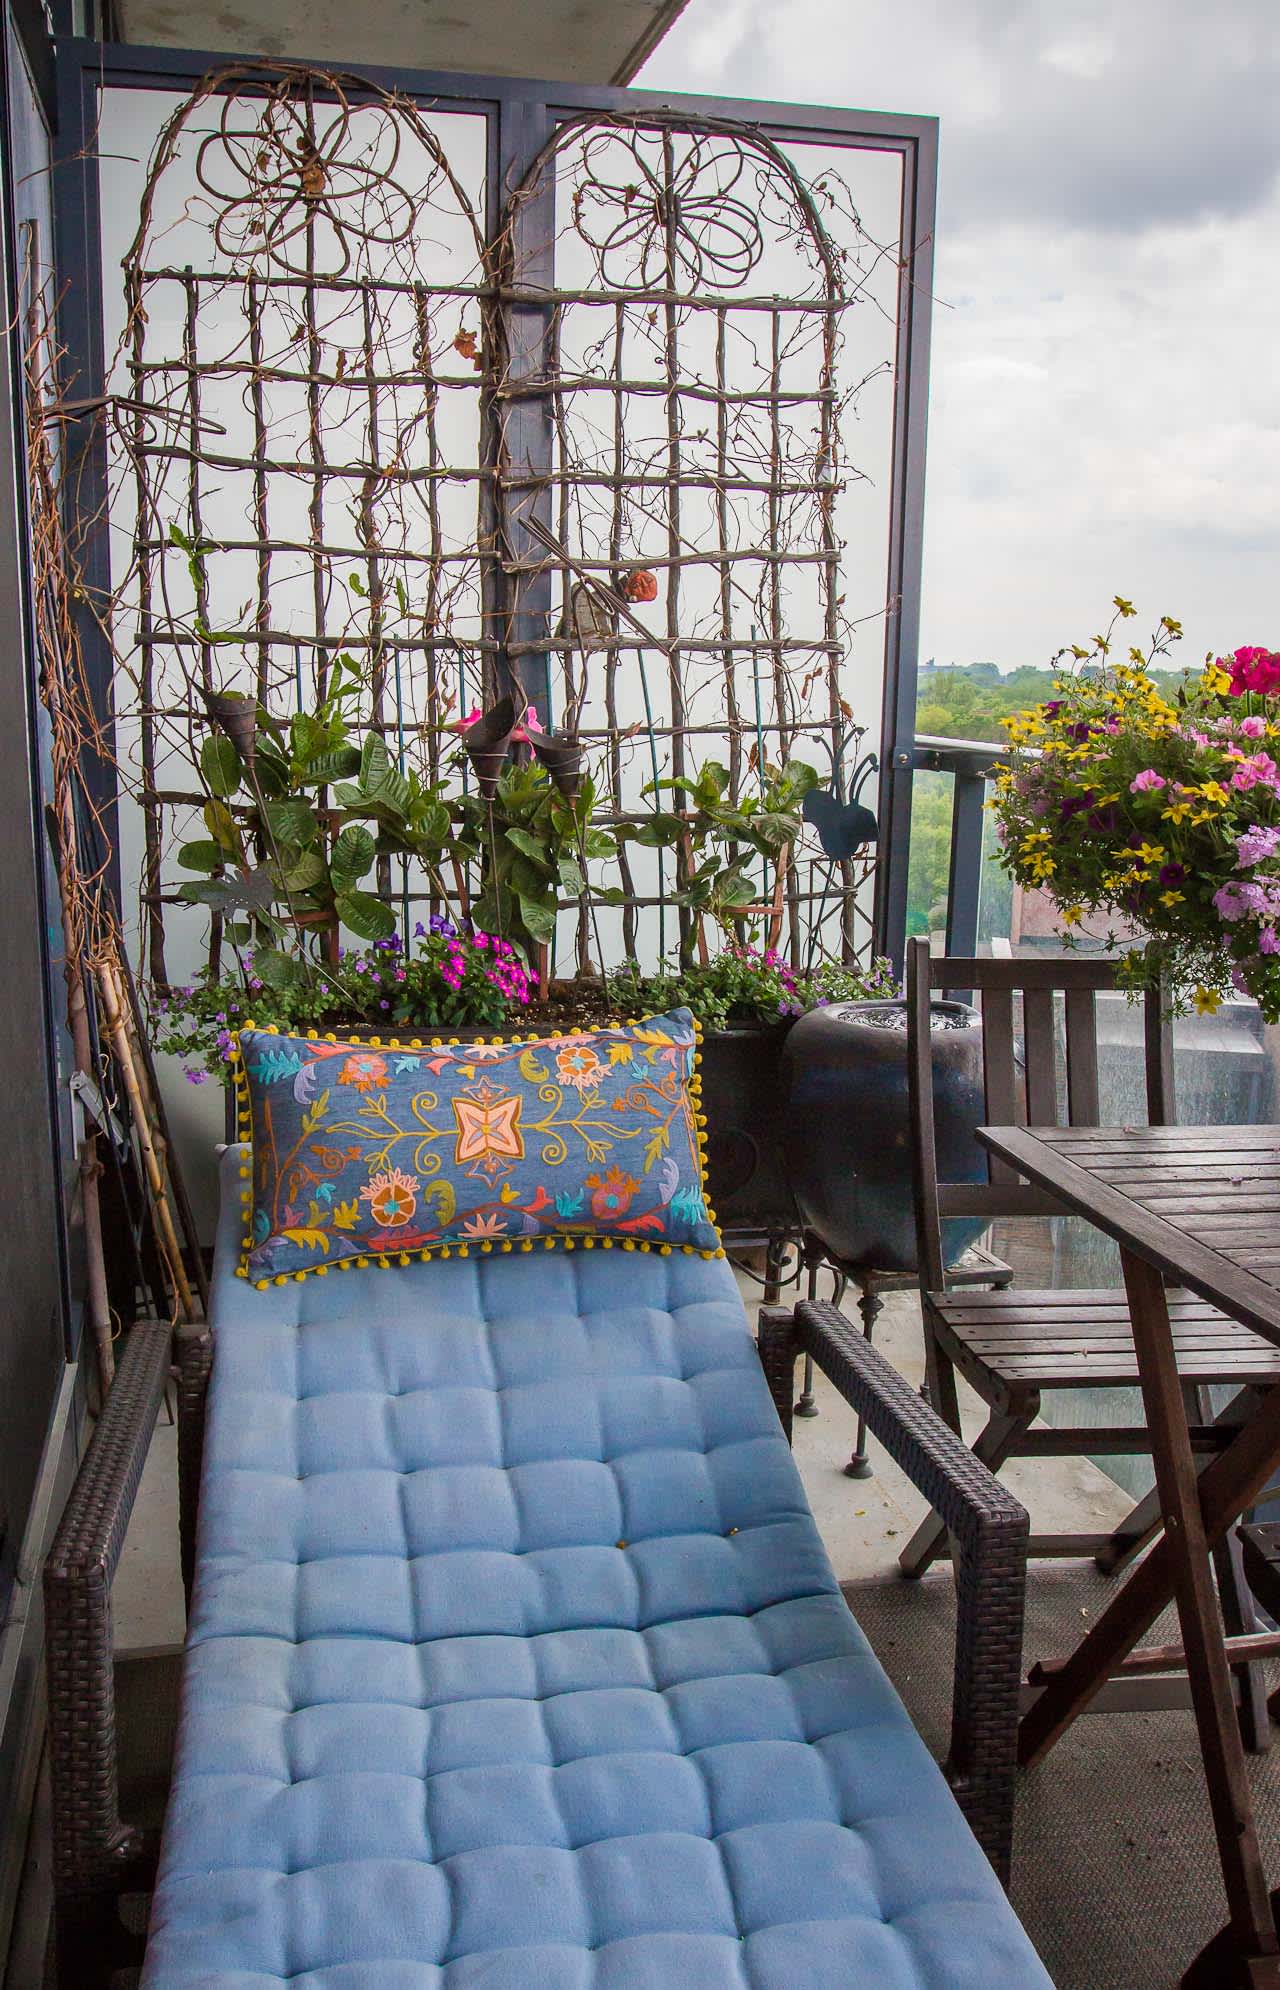 21 Best Balcony Ideas - How to Decorate a Small Balcony | Apartment Therapy